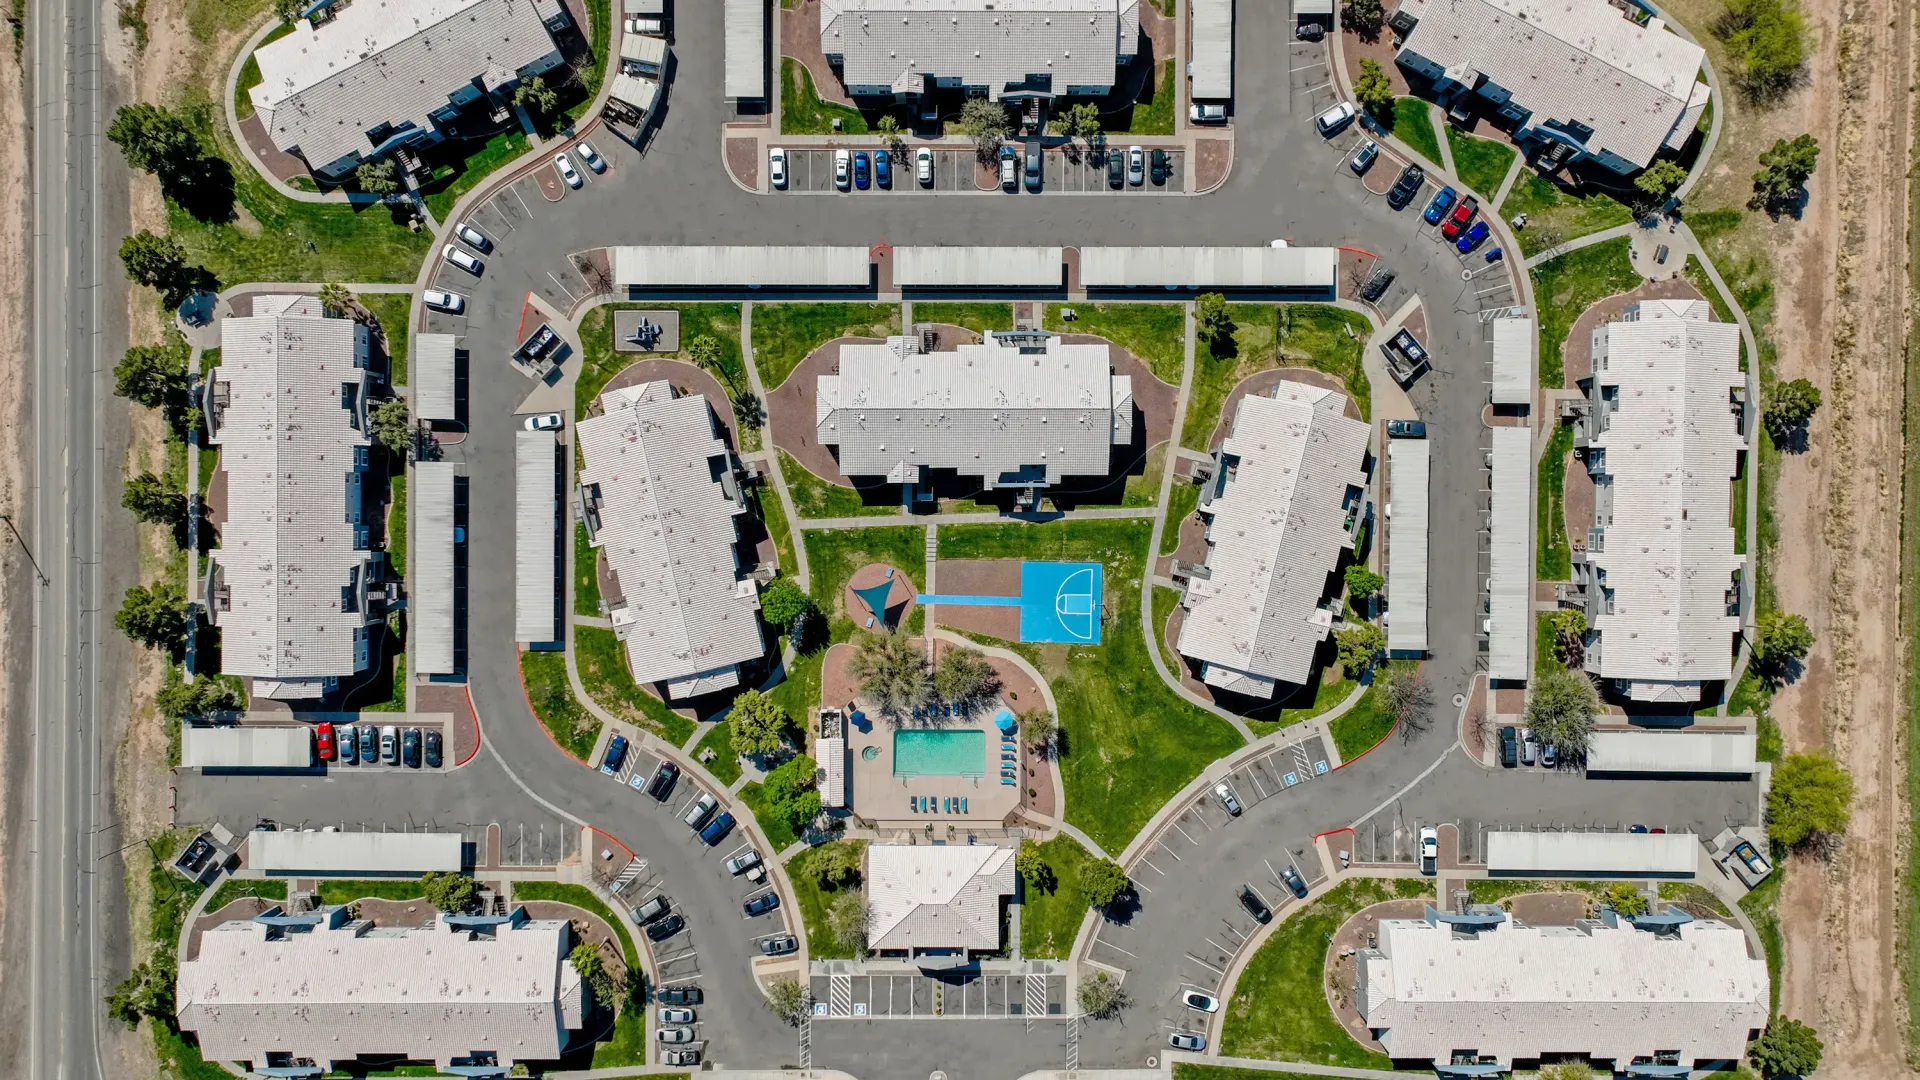 Overhead view of a robust apartment community showcasing the pool, amenities, carports, and parking spaces.